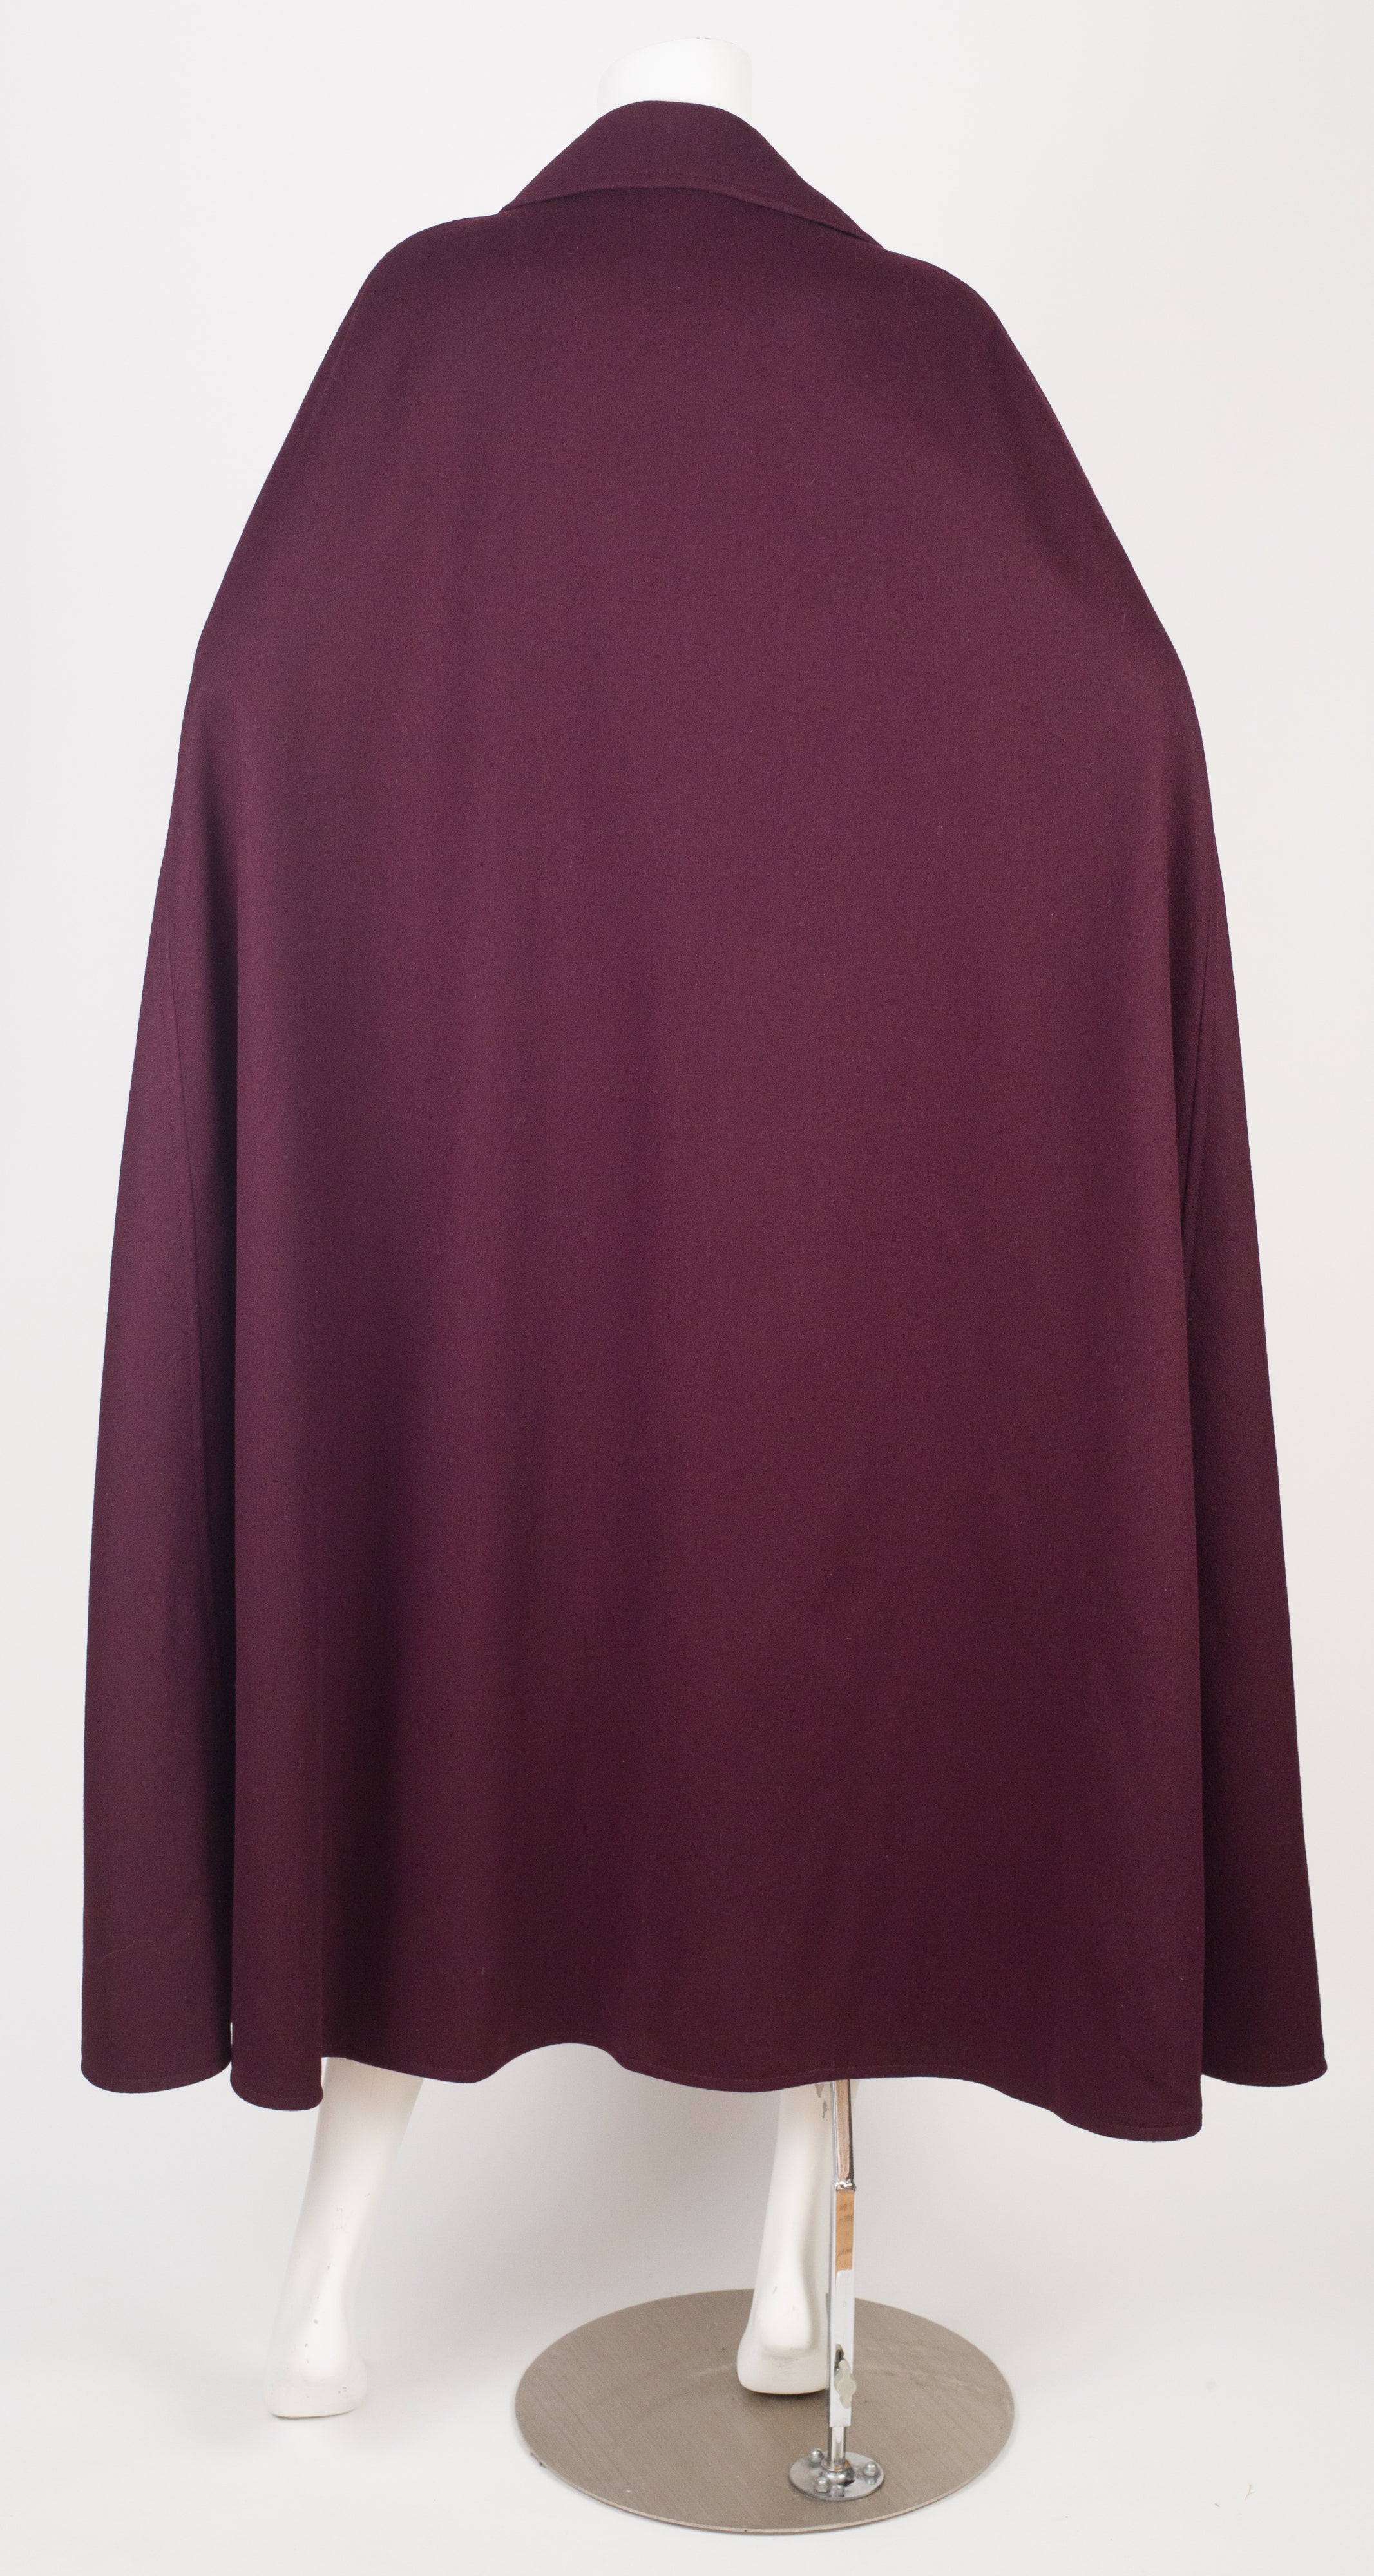 1971 Documented Burgundy Wool Collared Cape